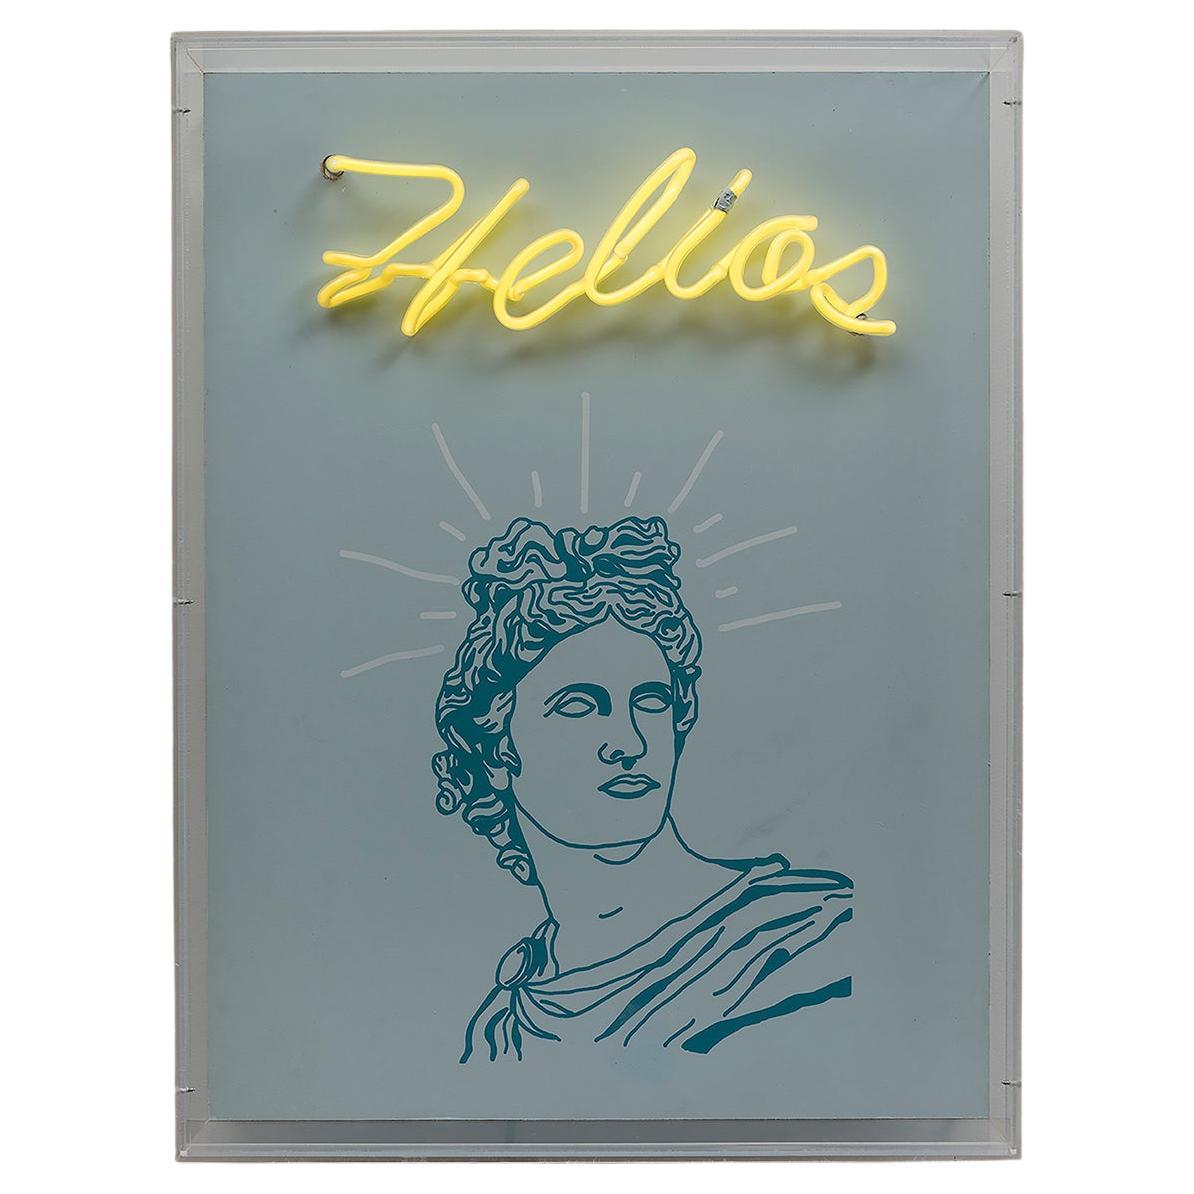 Helios. Neon Light Box Wall Sculpture. From the series Neon Classics